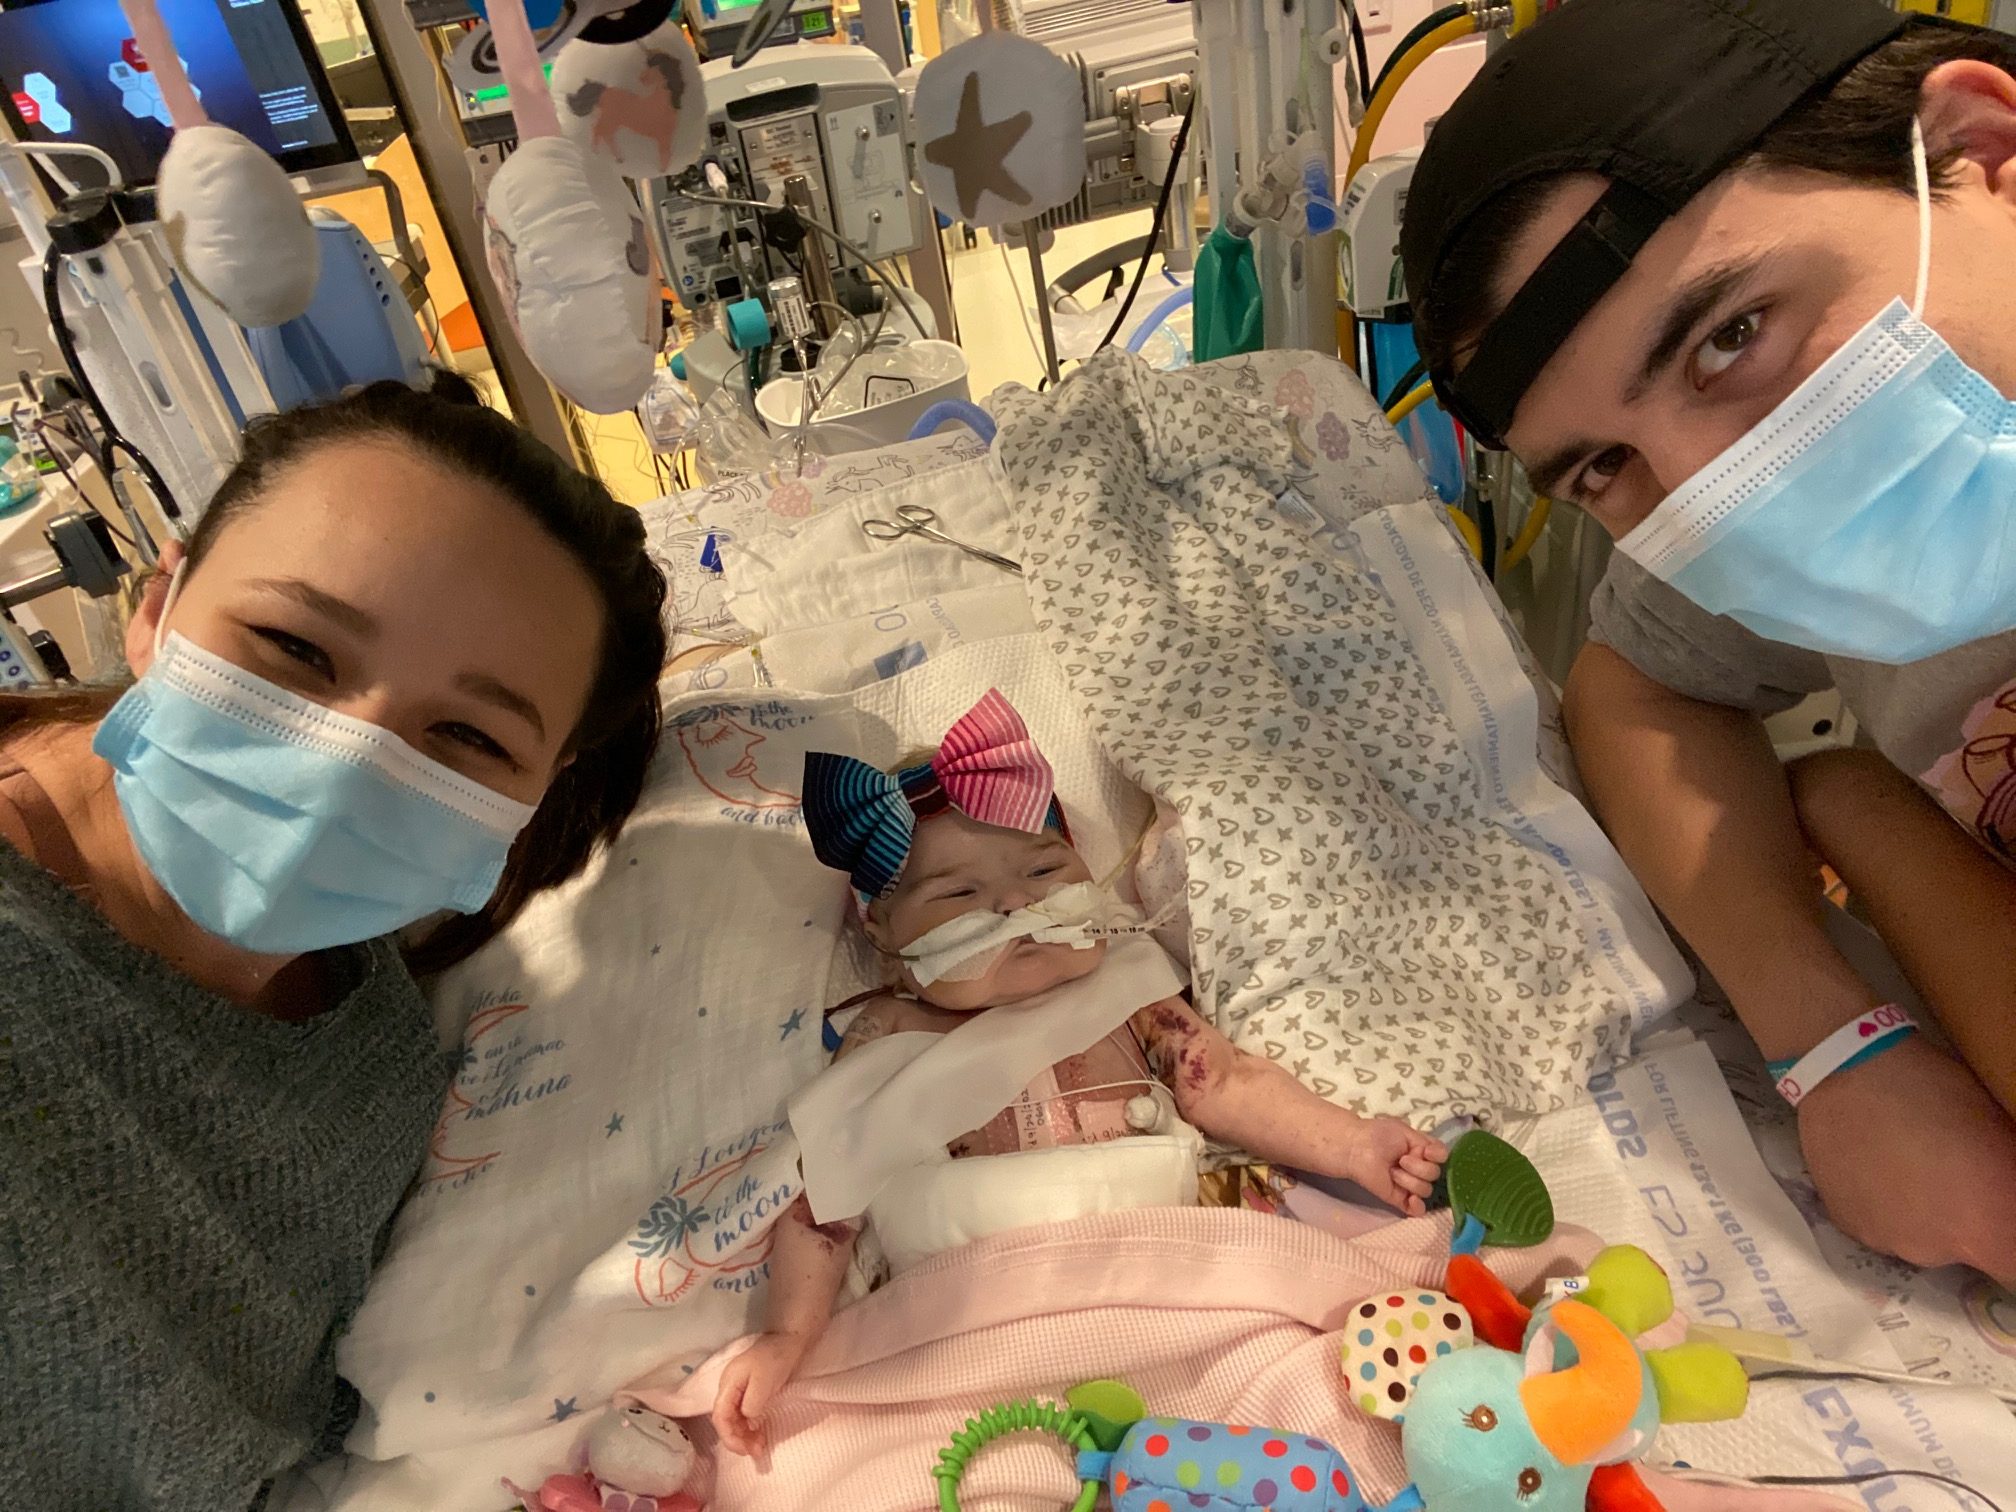 Mom, Dad and baby in hospital